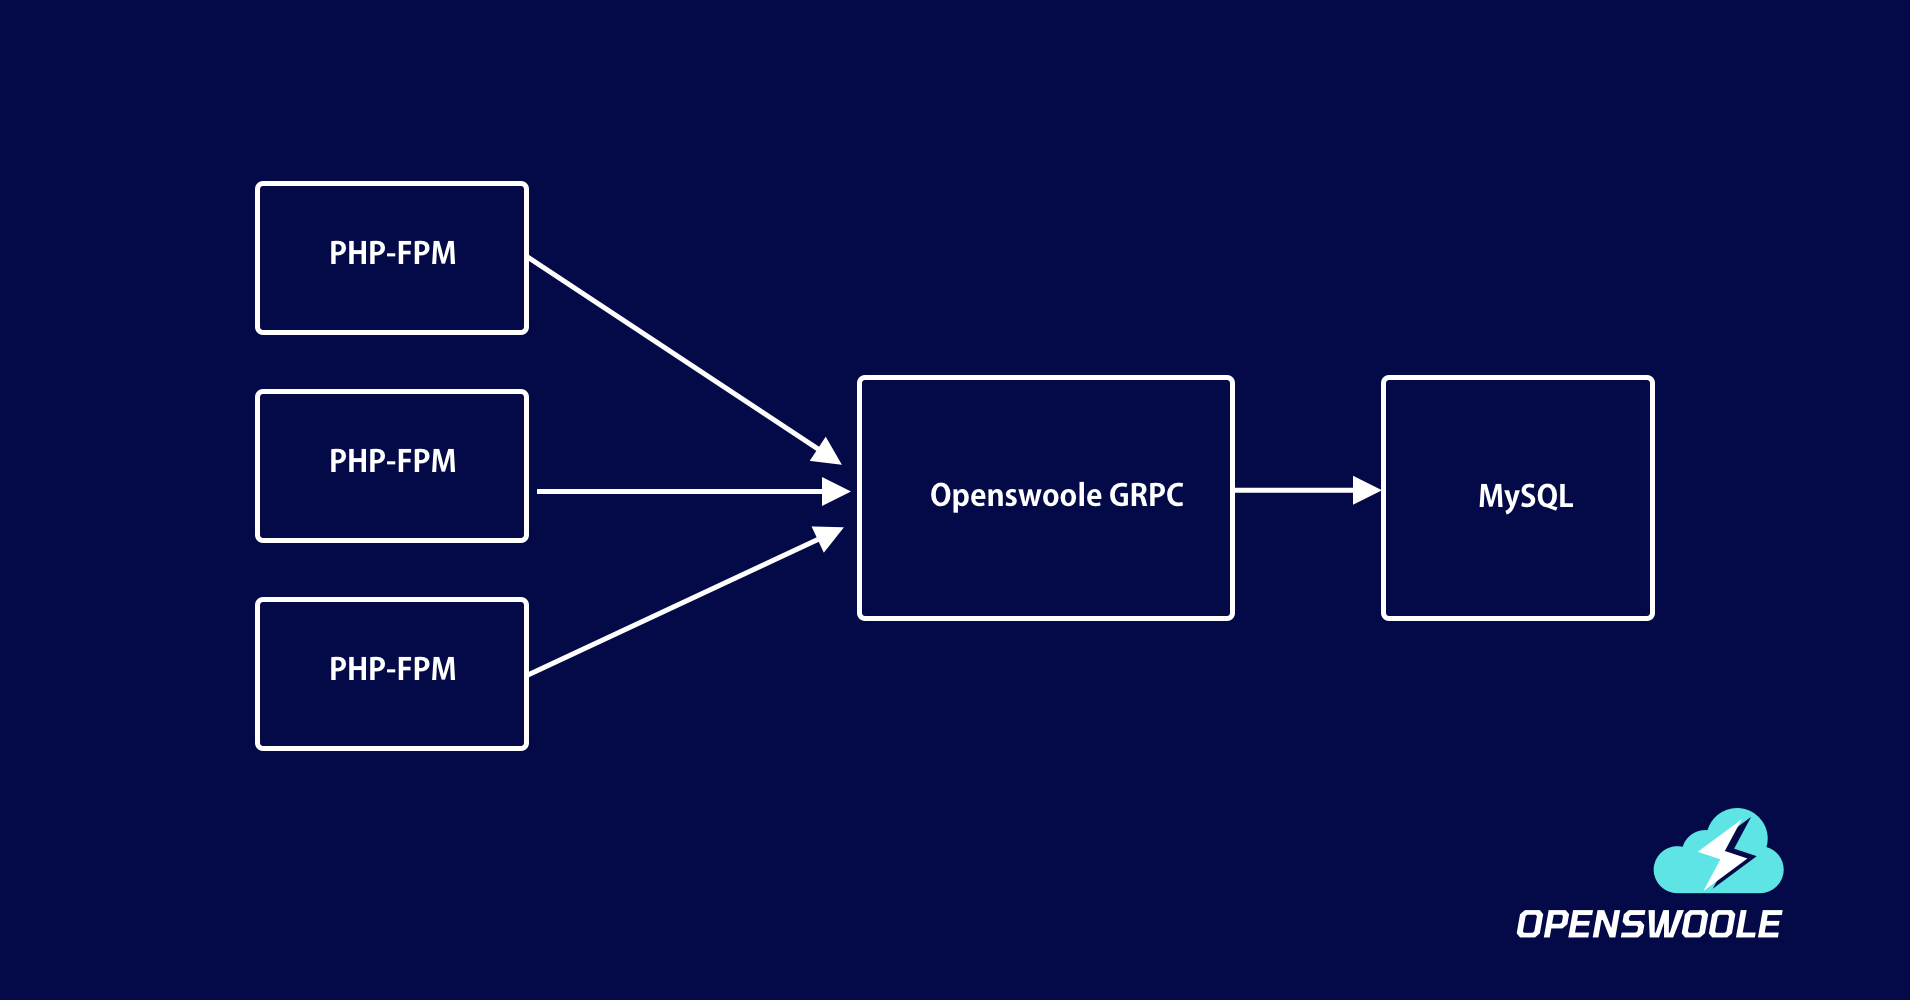 How to use OpenSwoole GRPC to implement database connection pool